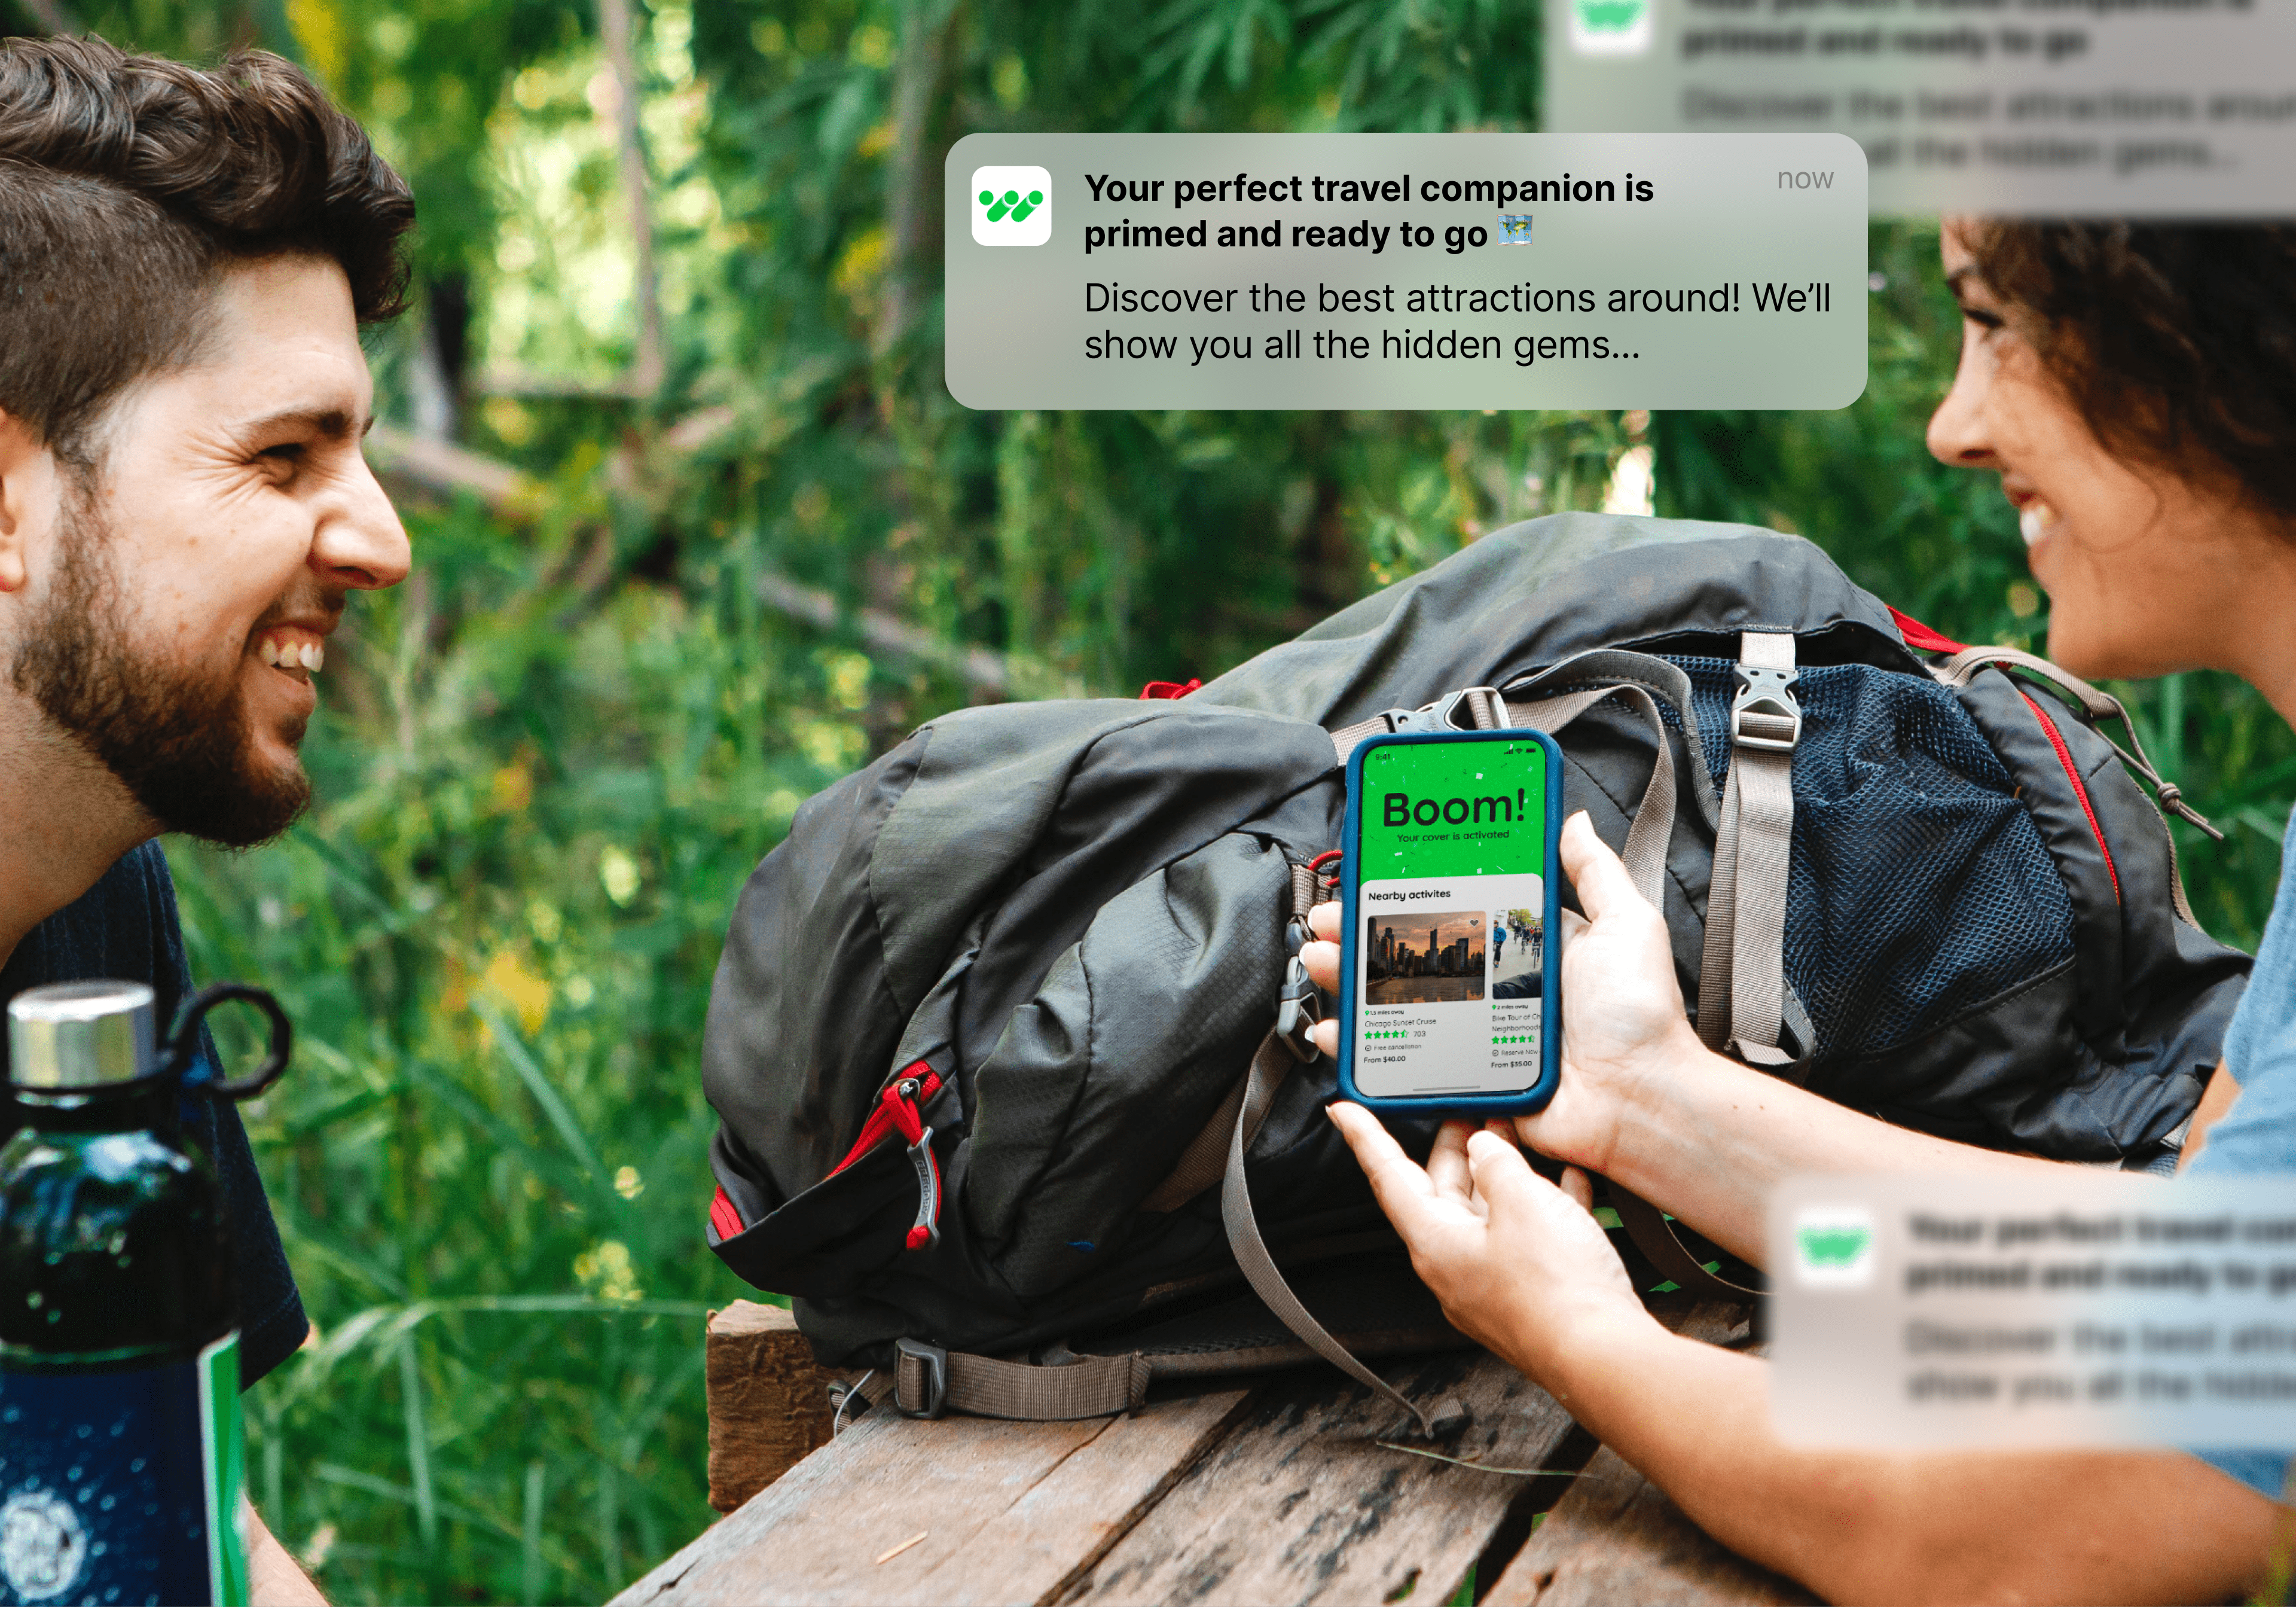 Picture of travellers outdoor using the Wapp travel mobile app insurance service designed by Glue